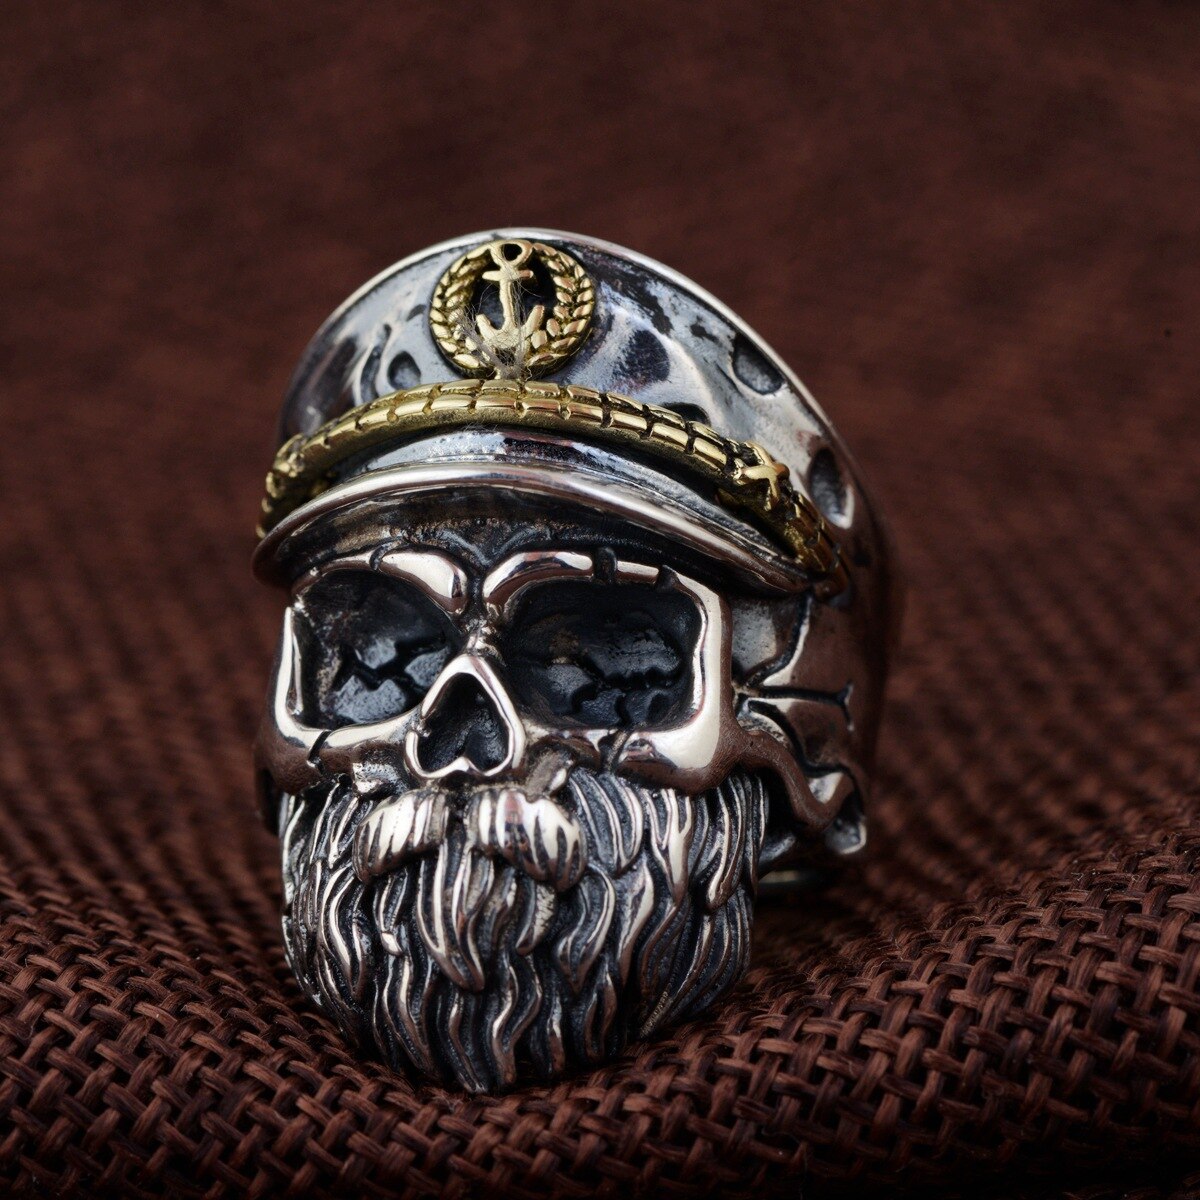 Personalitized Real 925 Sterling Silver Skull Ring Men Adjustable Pirate Captain Vintage